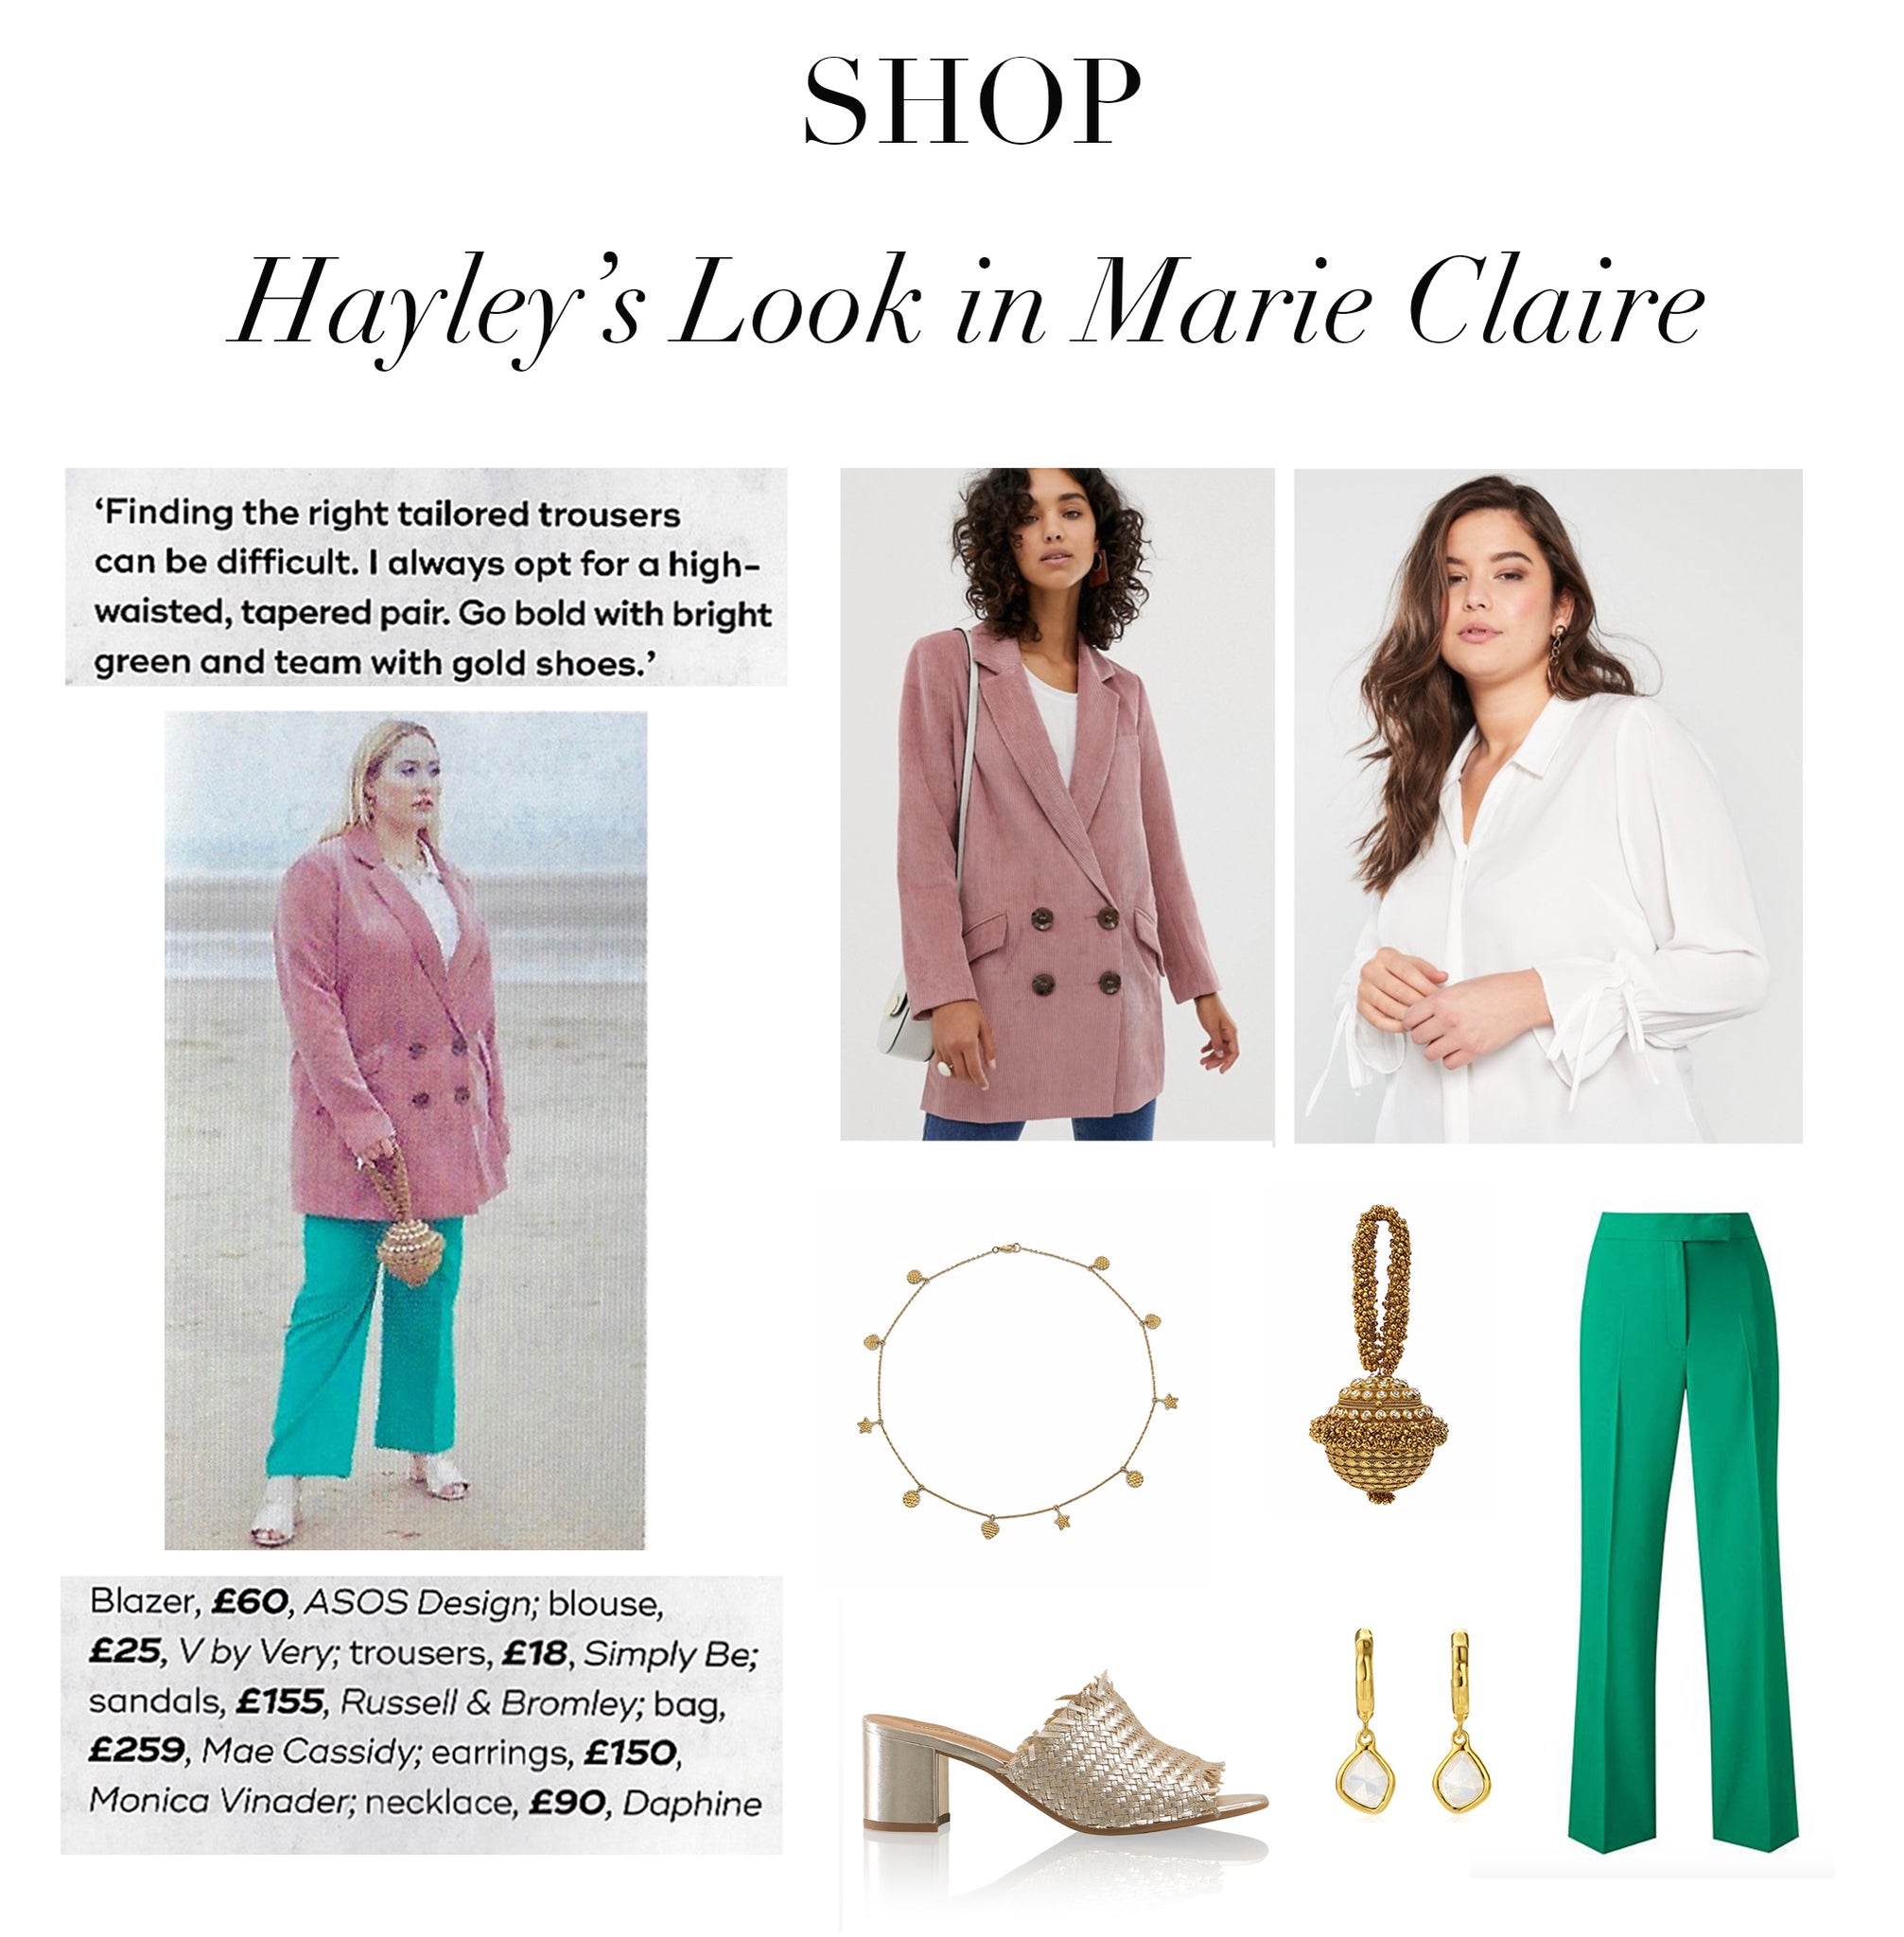 Mae Cassidy feature Marie Claire's June Issue 2019. Resident columnist Hayley Hasselhoff styles our Antique Gold Simi Sparkle clutch bag Curve Column, 'Sorbet Chic’ blush pink mint green pastel trends high street  Antique Gold Simi Sparkle oversized tailored Cord pink ASOS blazer white V by Very shirt colour green trousers accessorised gold hues Russel Bromley gold leather heeled sandal’s Monica Viander Necklace Daphine earrings gold silver Simi Sparkle clutch bag handbag occasionawear perfect addition to any outfit for effortless